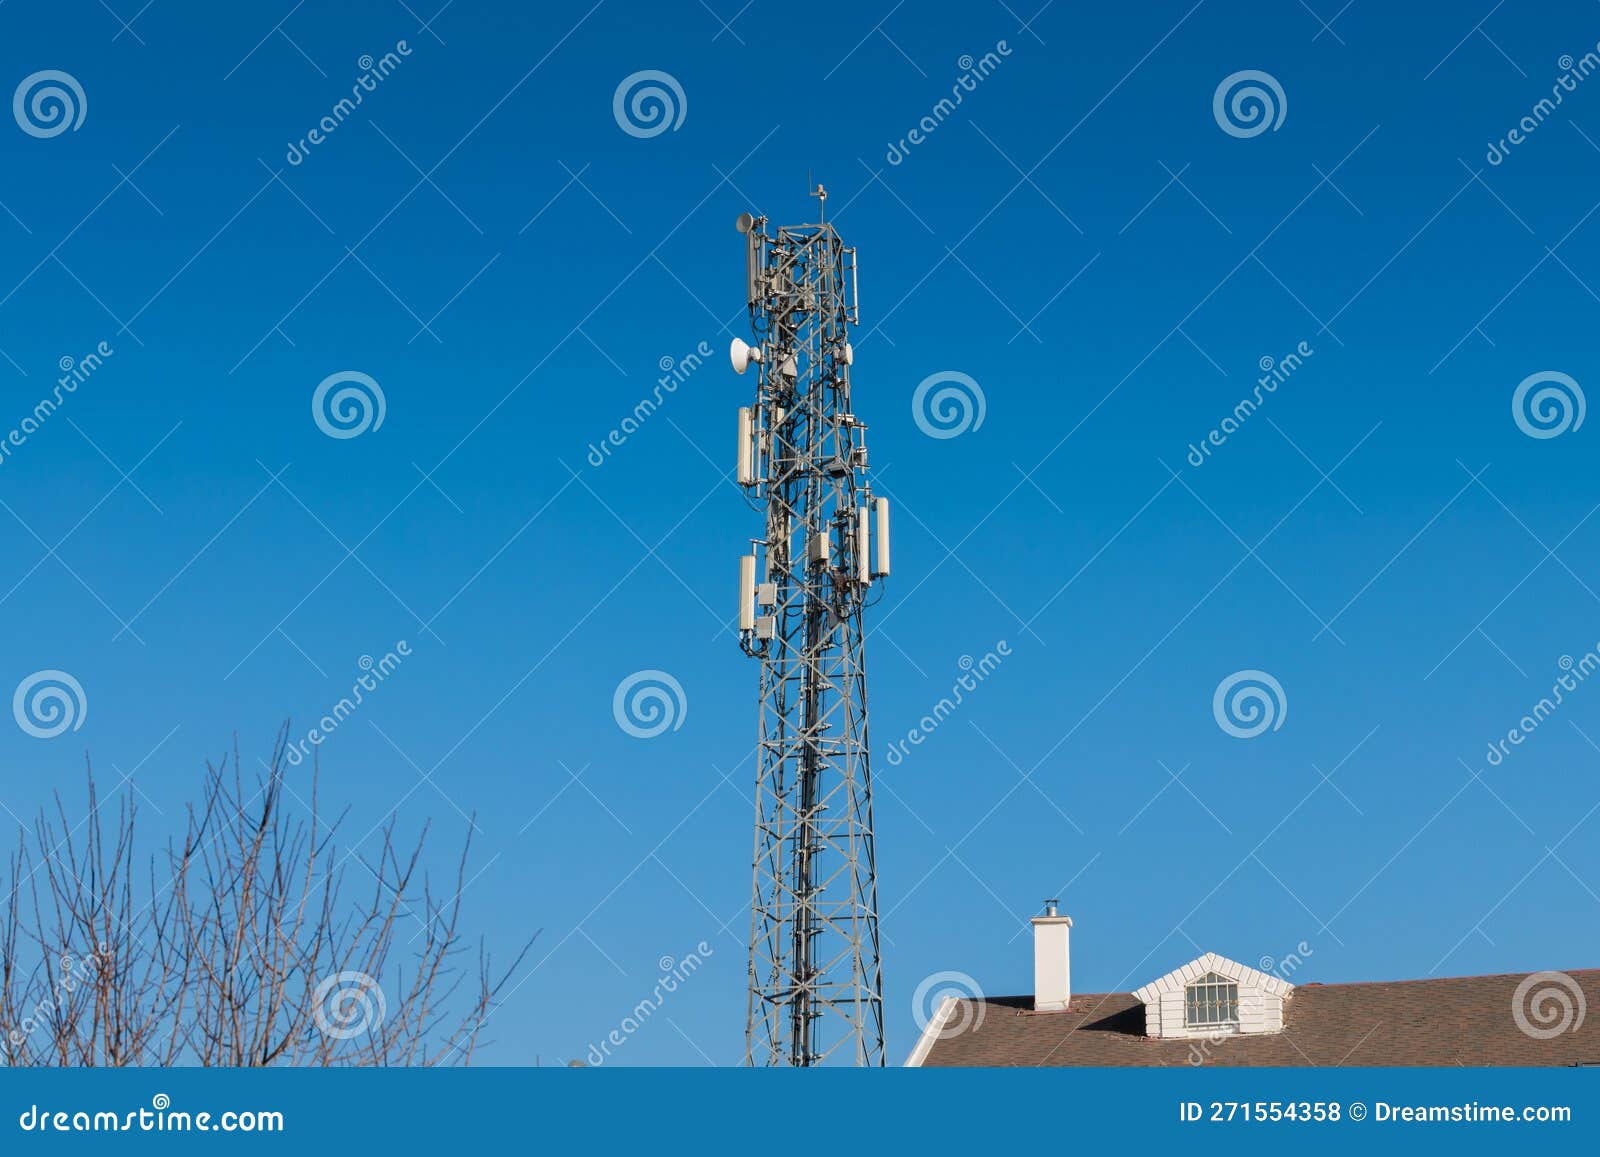 communication antenna transmitter. telecommunication tower. wireless 3g, 4g and 5g cell site in front of blue sky